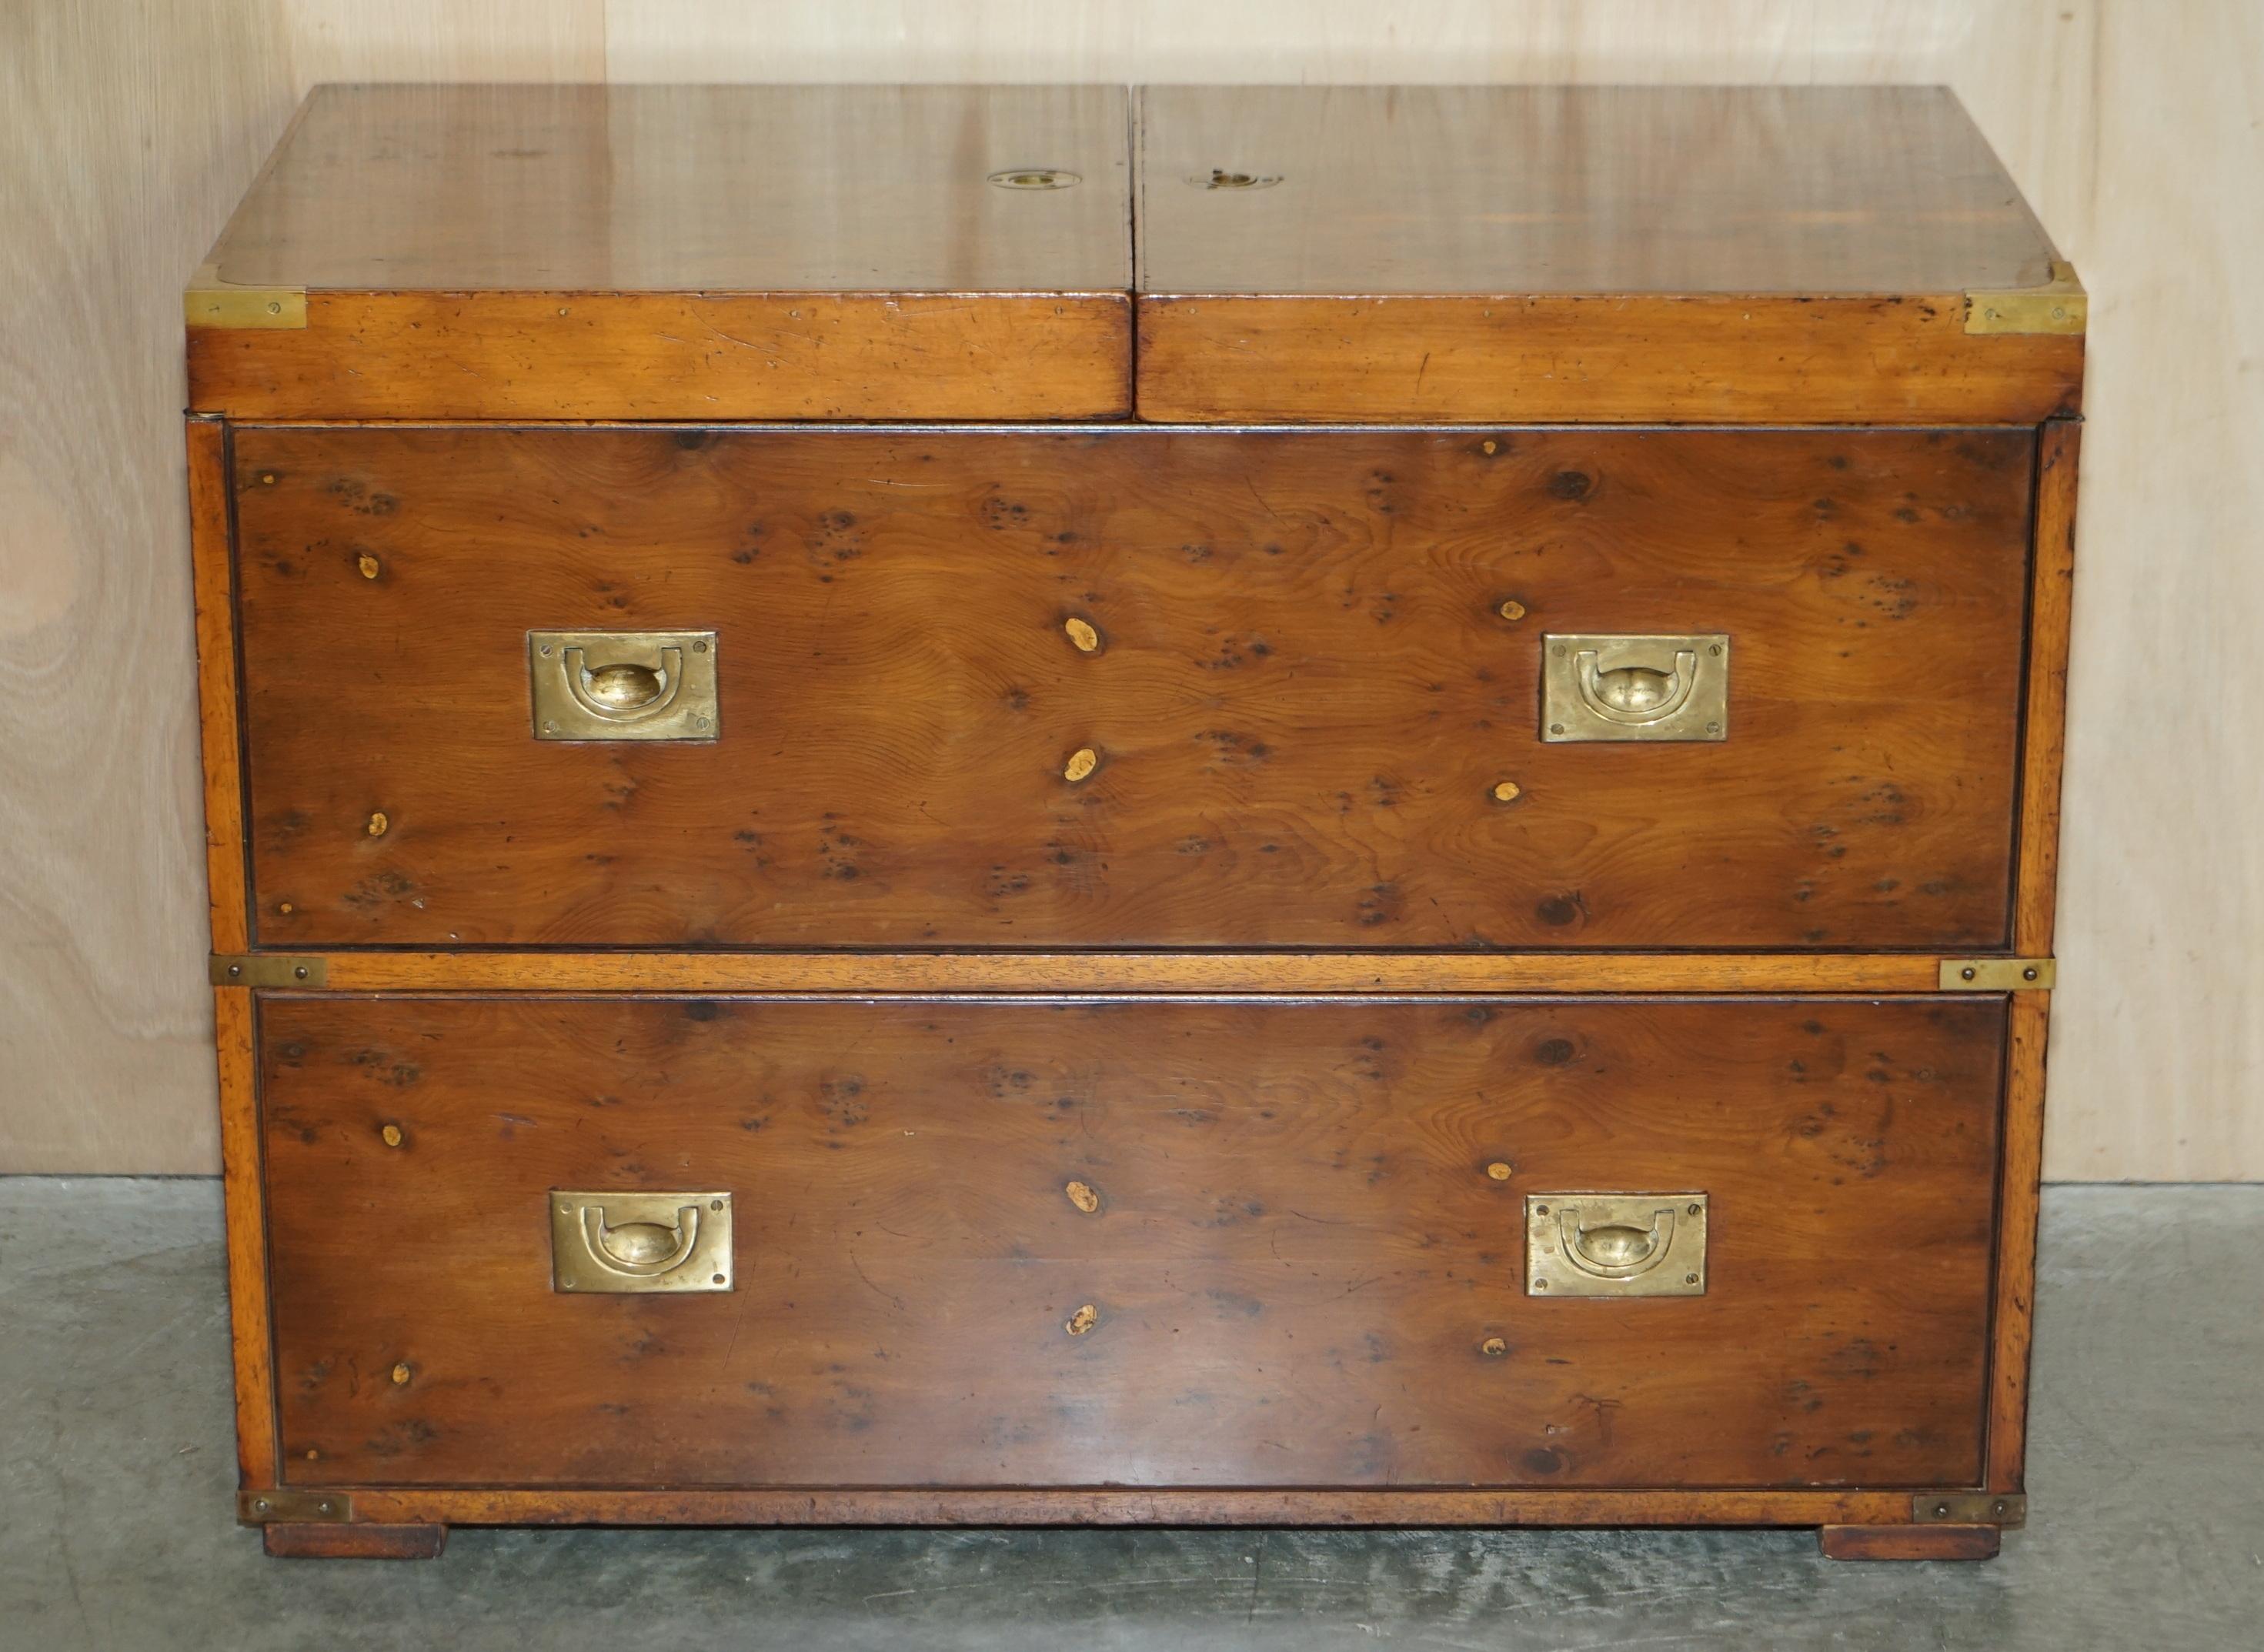 We are delighted to offer for sale this stunning Burr yew wood military campaign chest of drawers which houses a drinks cabinet

A very good looking well made and decorative piece, the drawers are faux and the whole piece is designed to house your